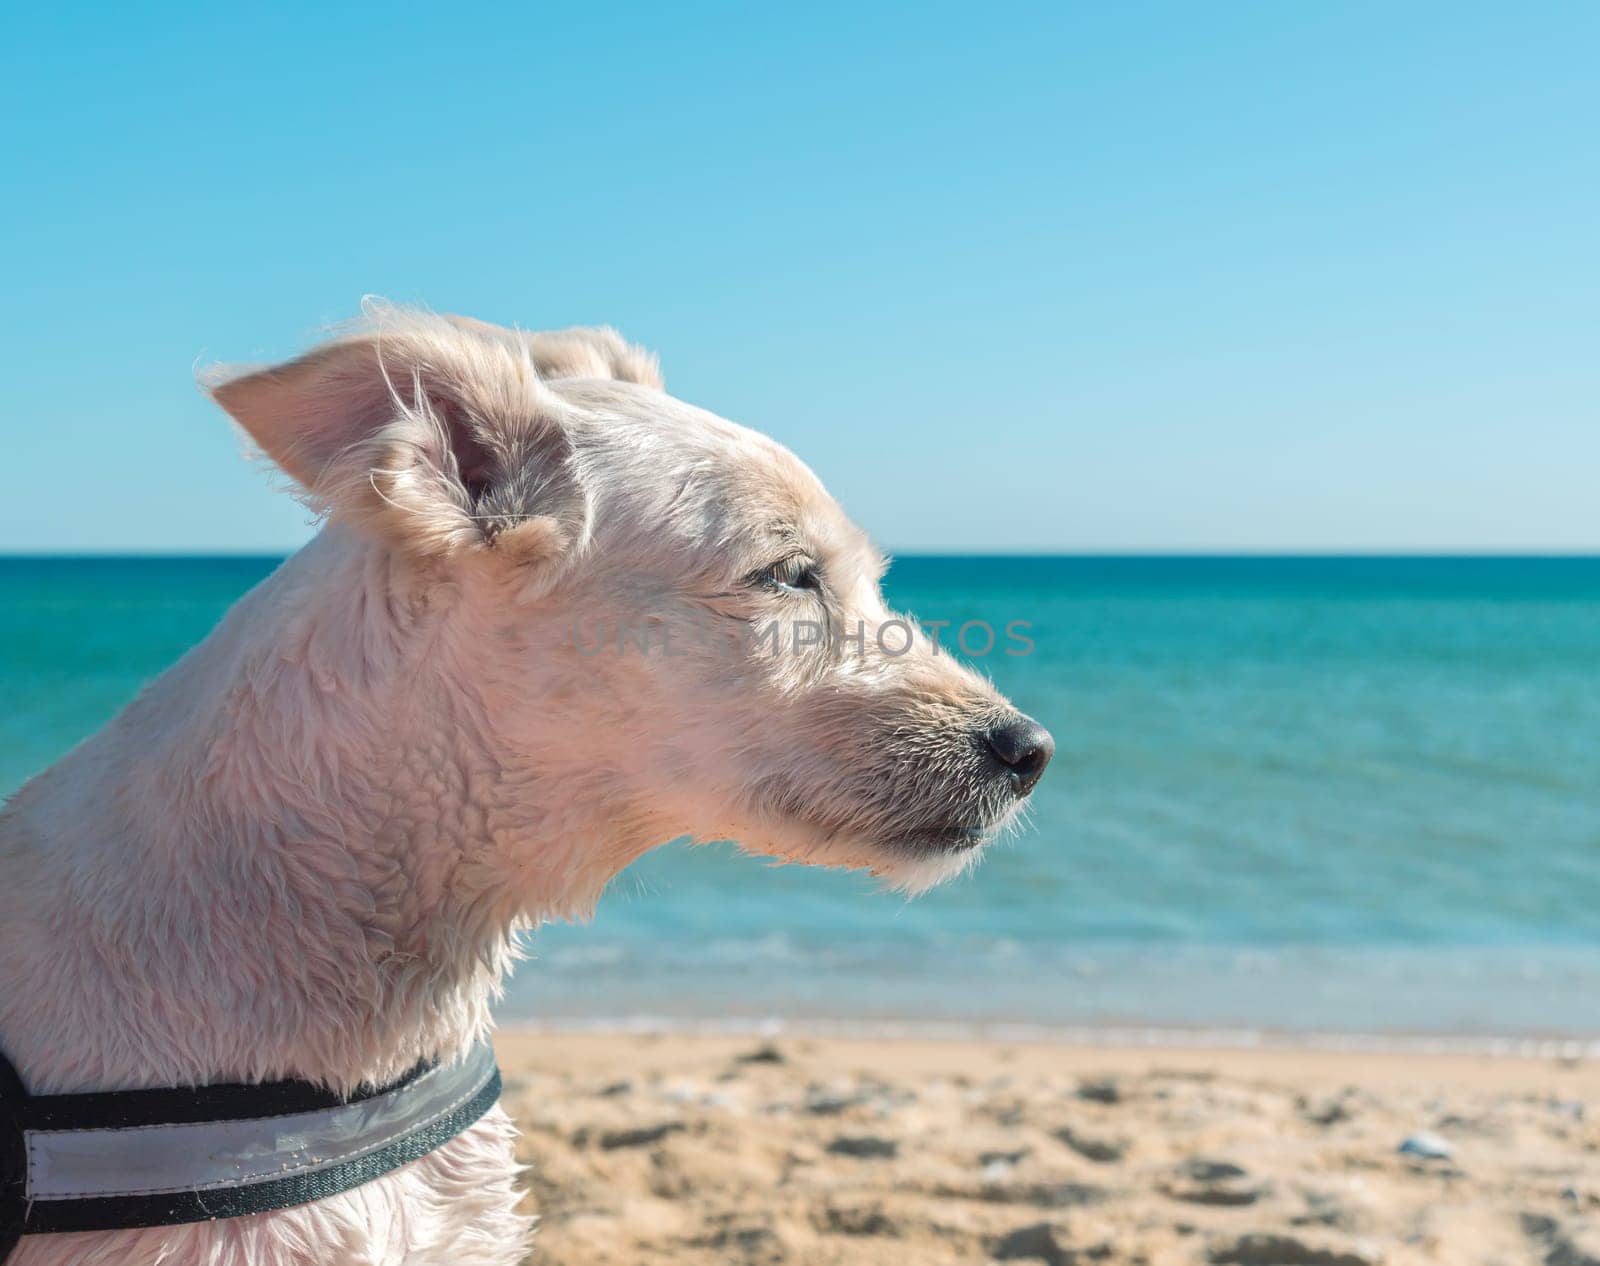 A small white dog with short fur enjoys a calm and sunny day at the beach, gazing at the distant waves with a relaxed demeanor.